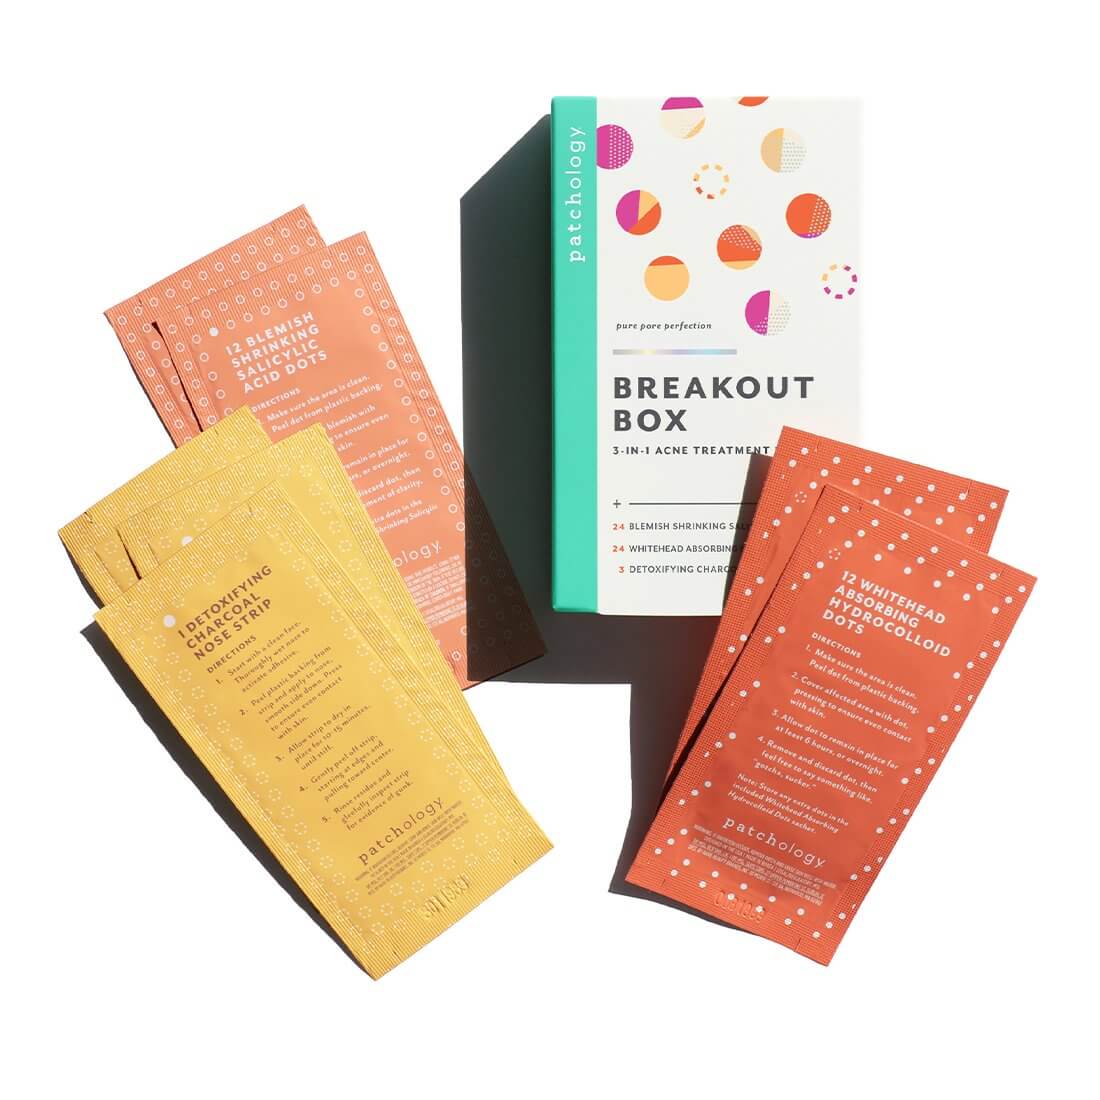 Acne Stickers and Blemish Patches Included in Breakout Box Acne Treatment Kit - Patchology